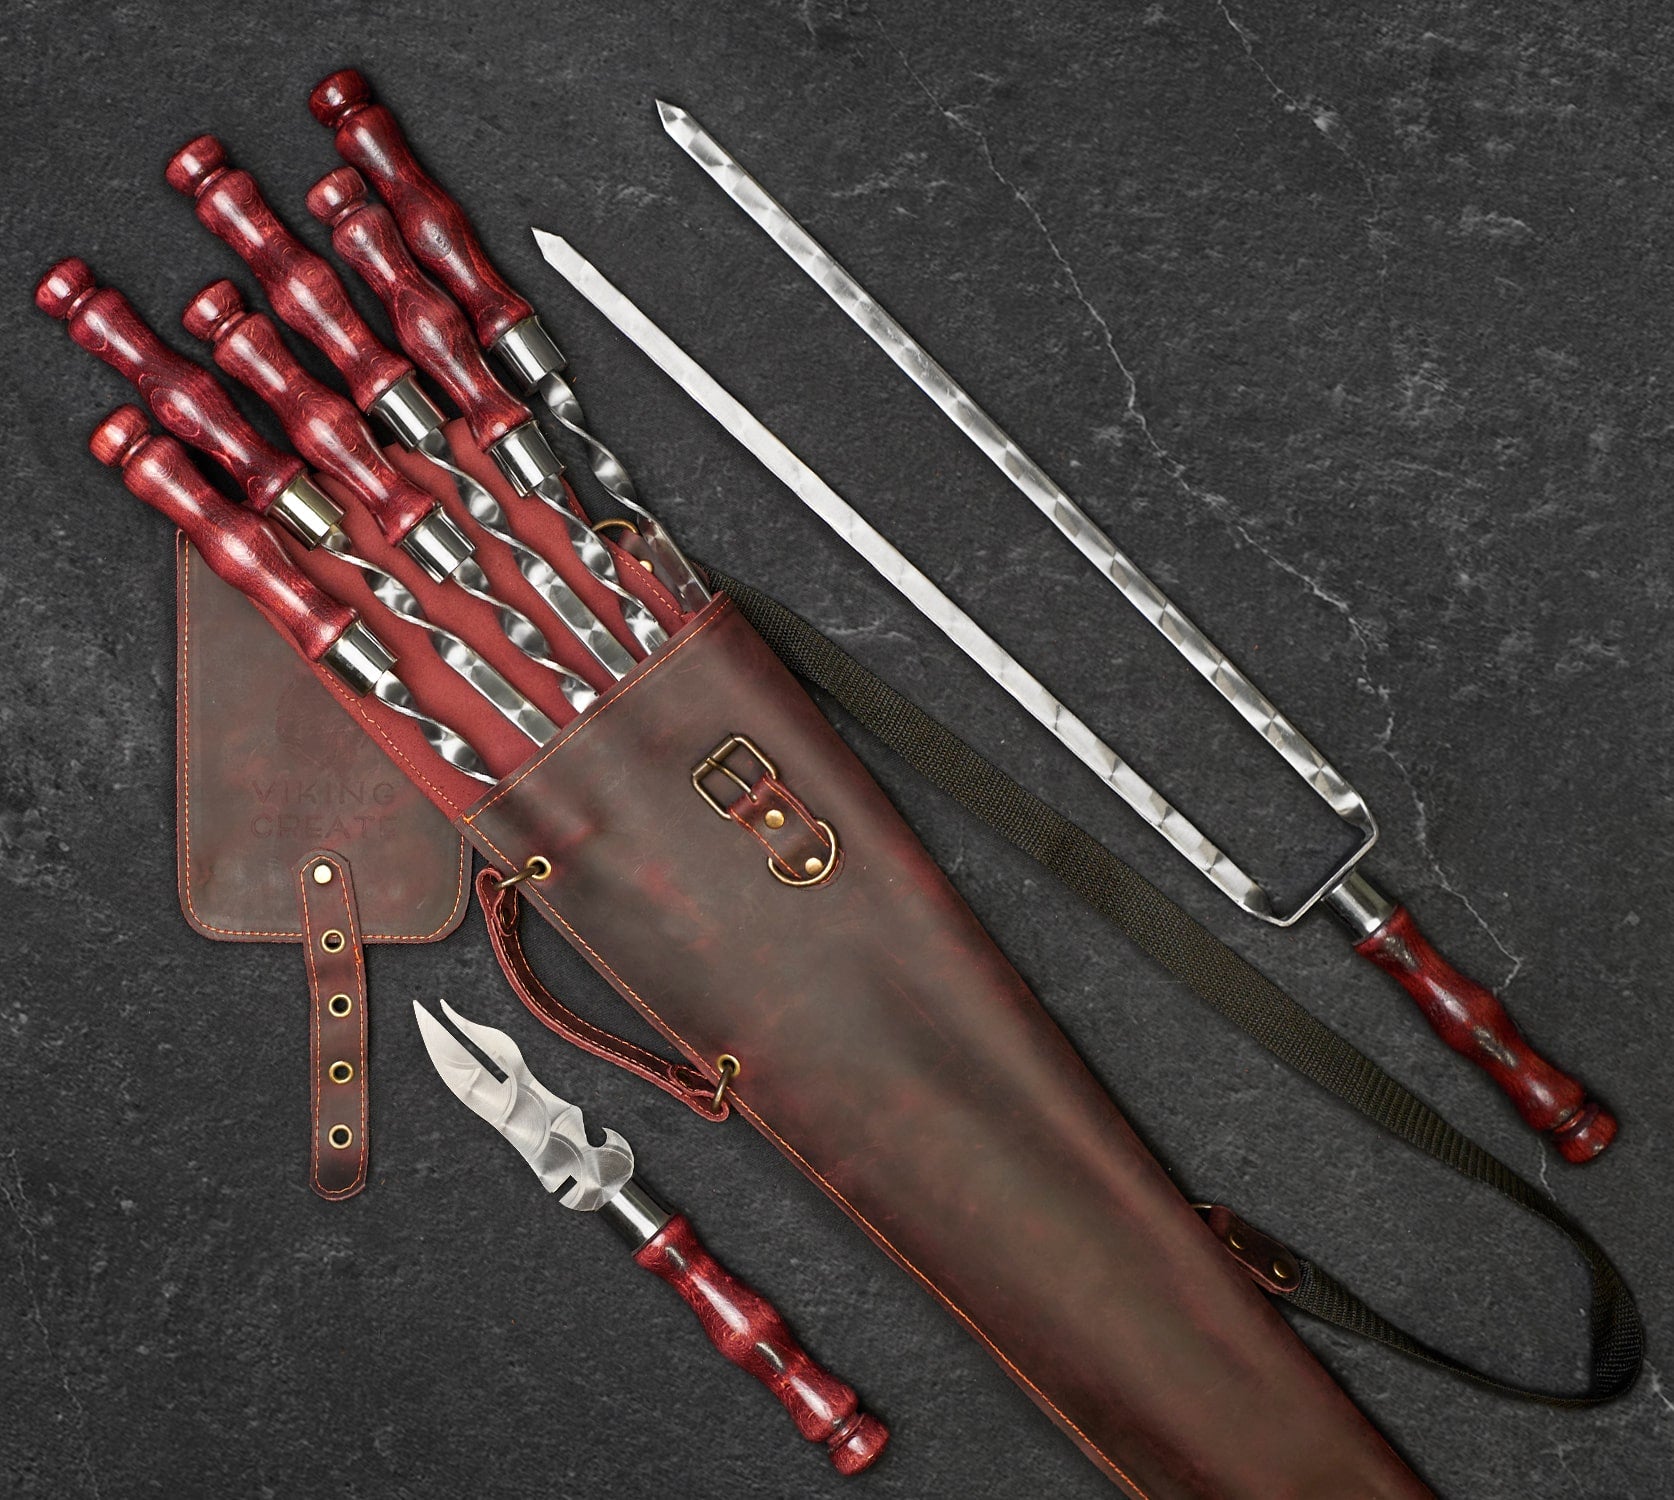 Barbecue Grilling Accessories - Barbecue Tools Set "Hunting Quiver" – Skewers Set - BBQ Grills and Accessories in a Leather Case, Camping Equipment, 8 items